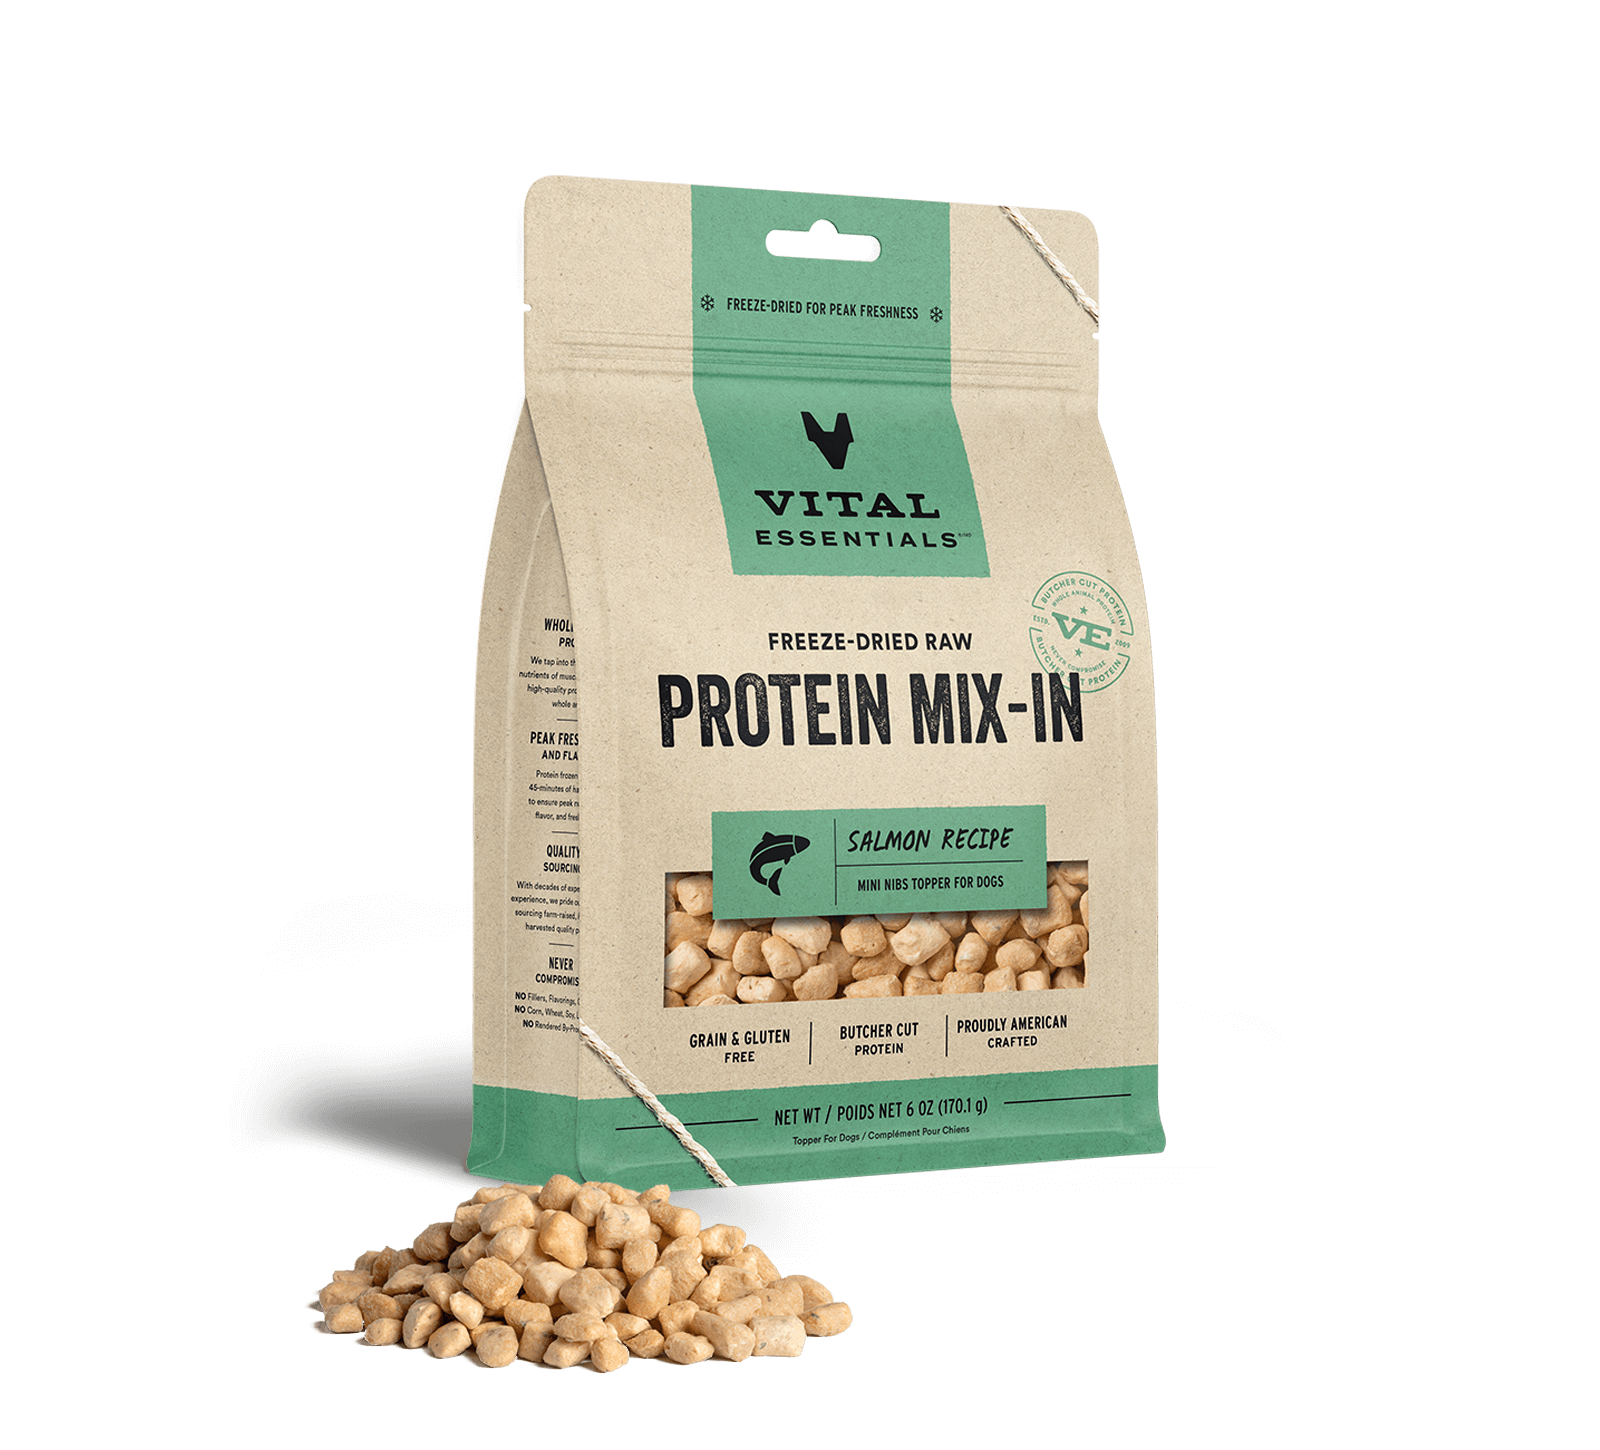 Vital Essentials Freeze-Dried Raw Protein Mix-In Salmon Recipe Mini Nibs Topper for Dogs, 6 oz - Health/First Aid